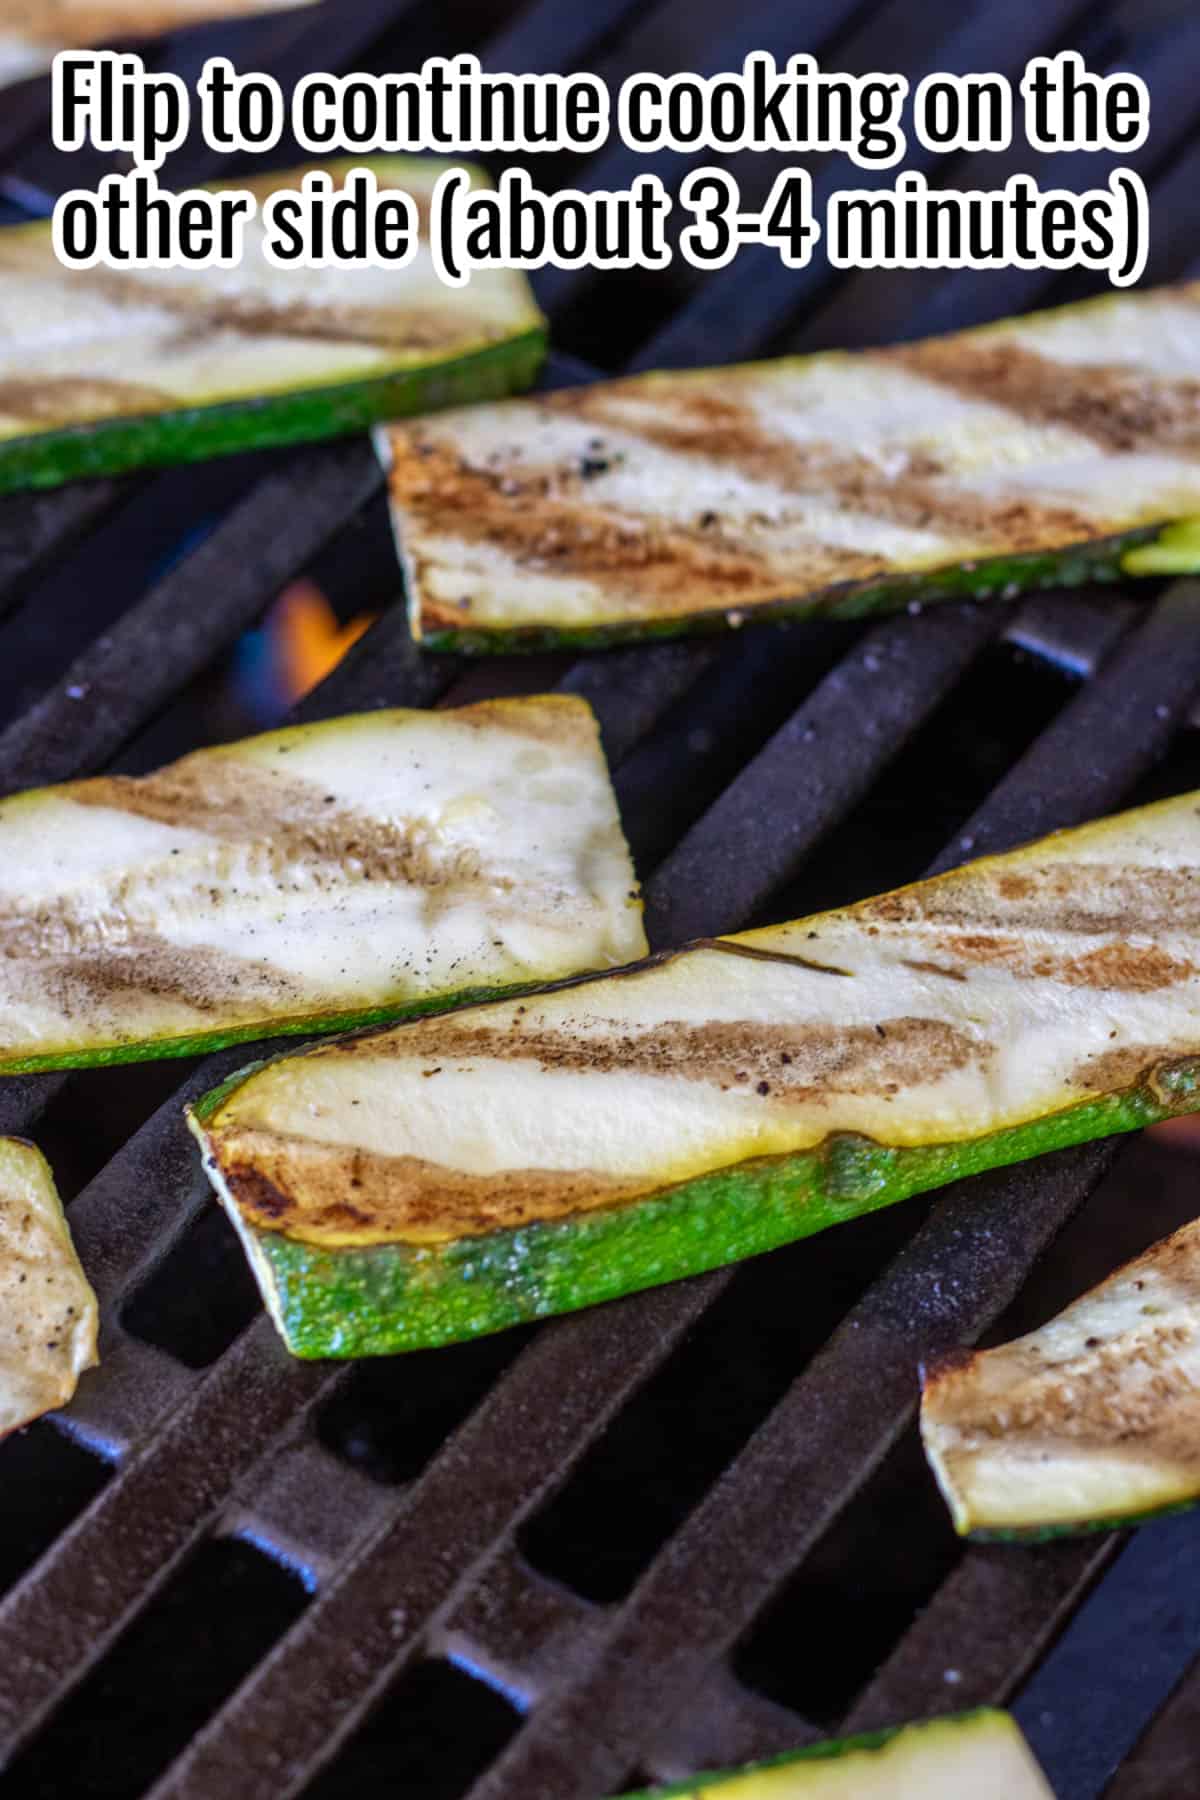 Zucchini slices on a grill, with grill marks.